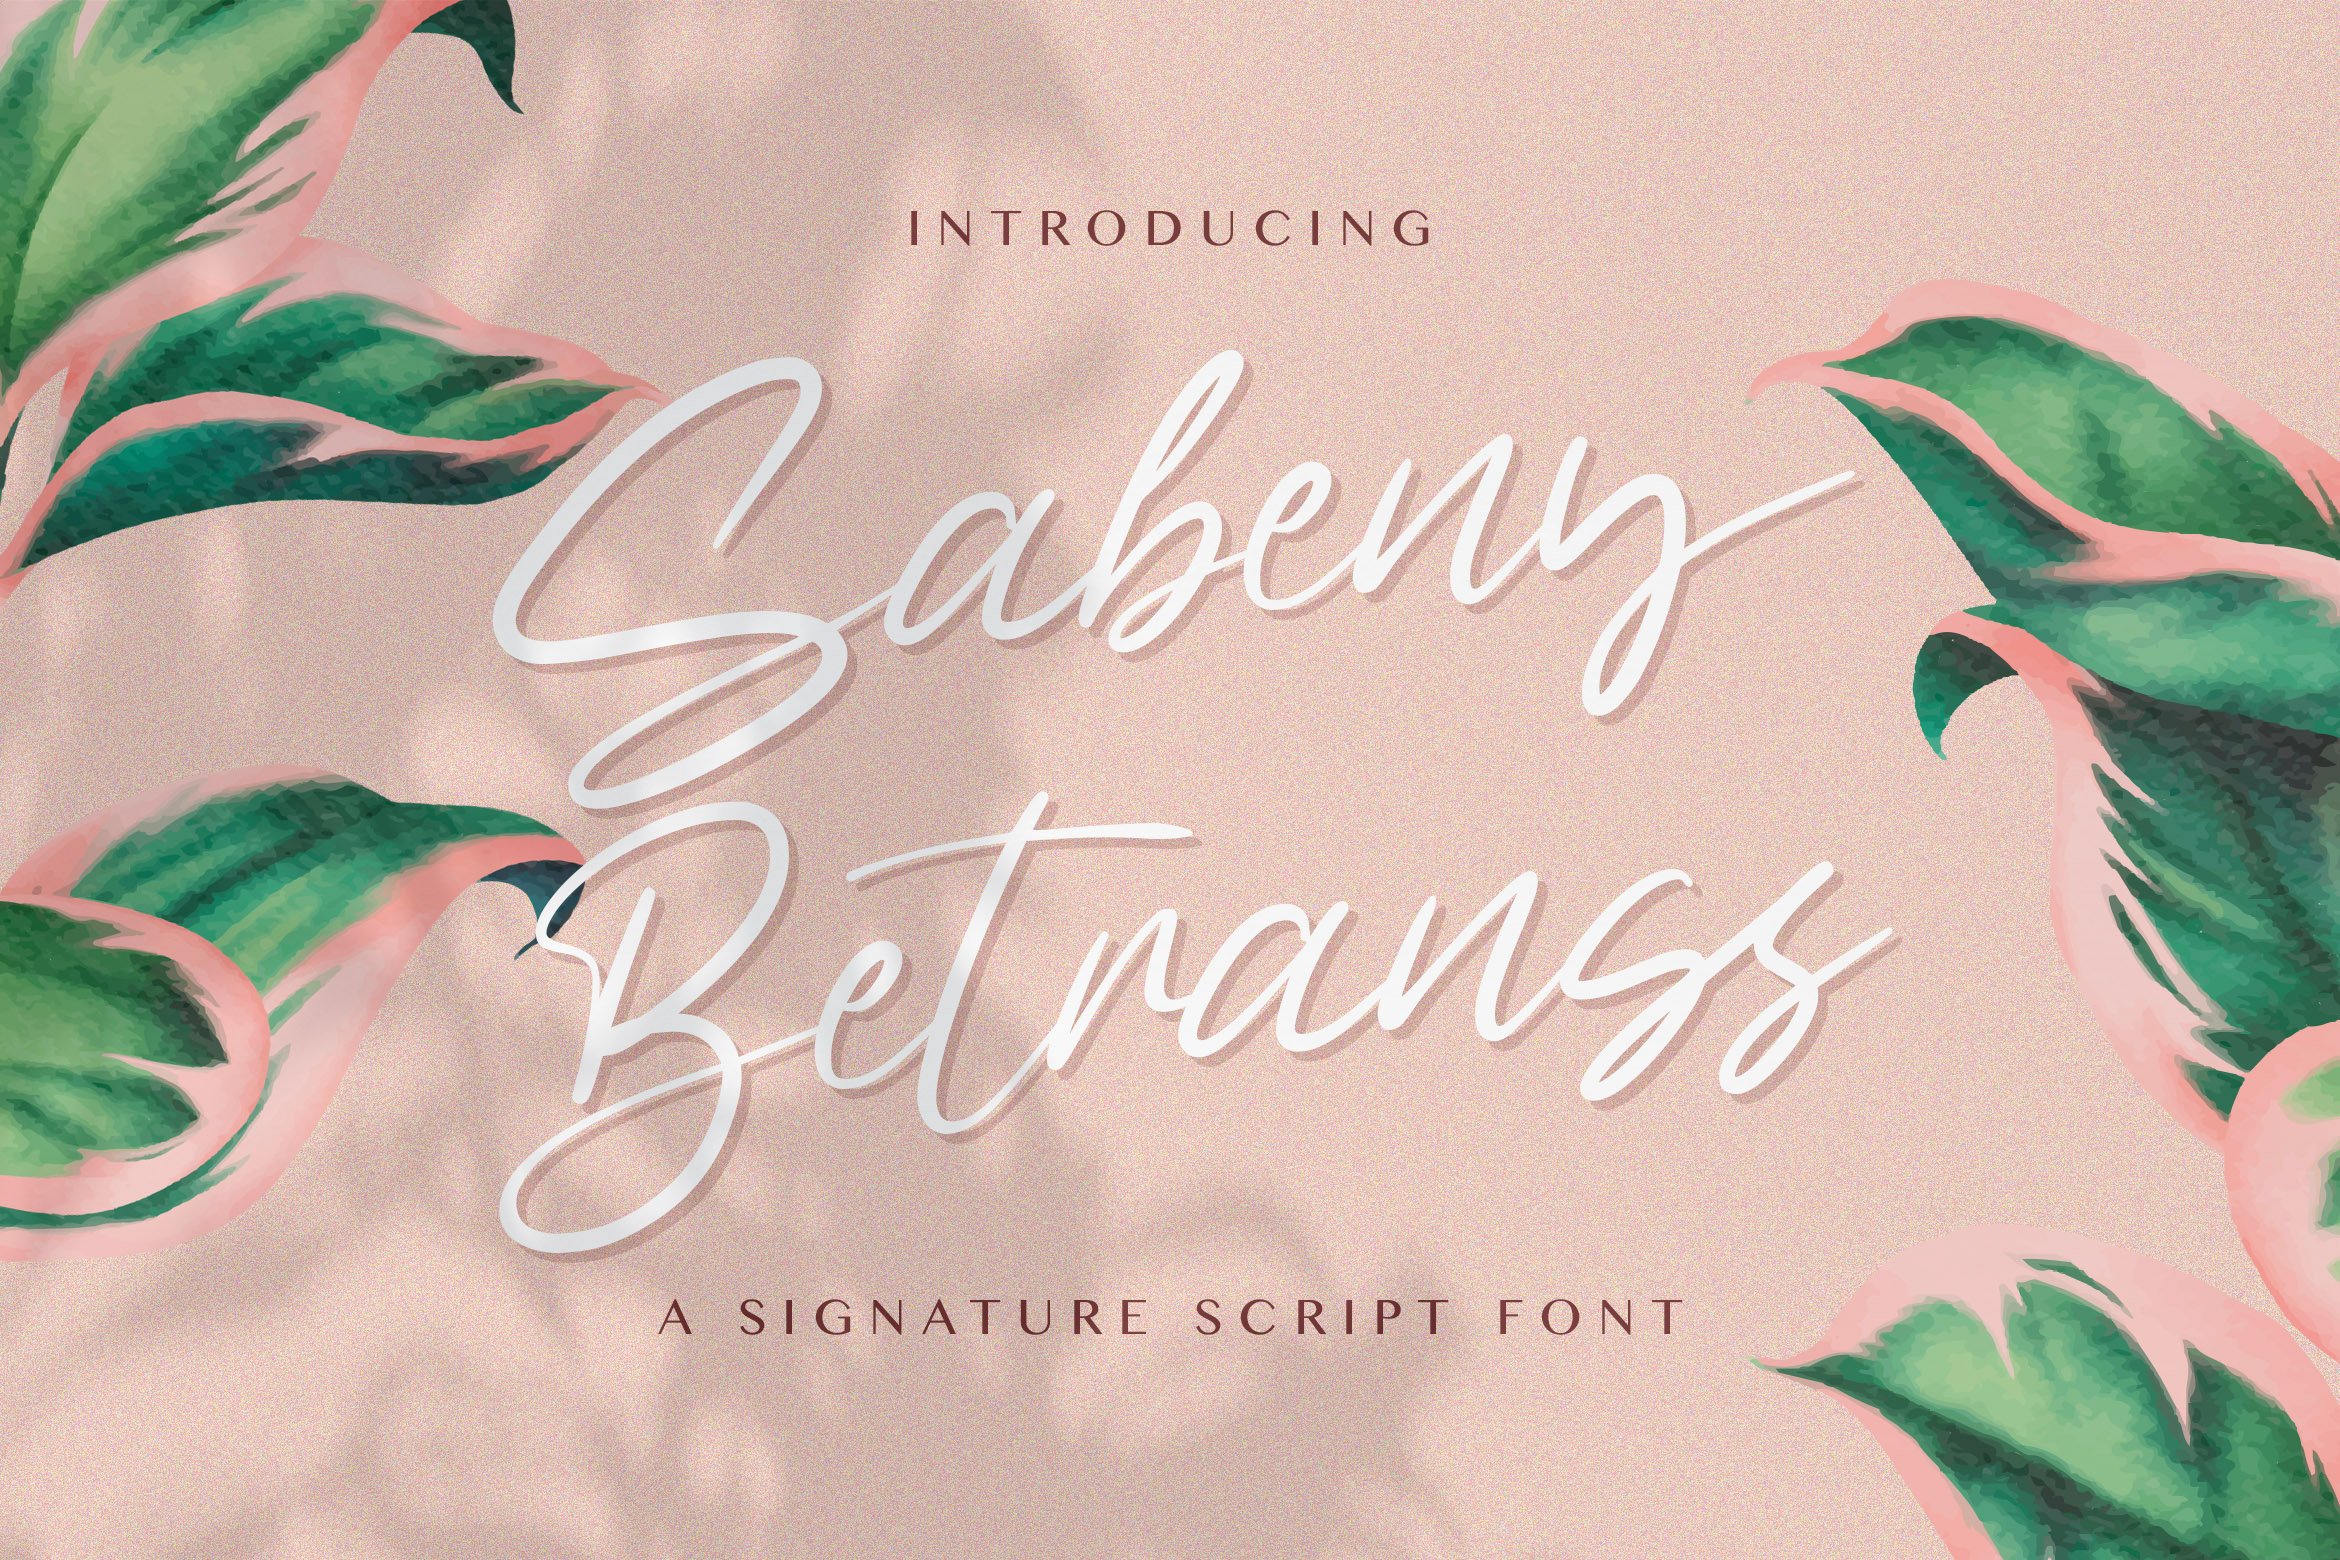 Sabeny Betranss - Handwritten Font cover image.